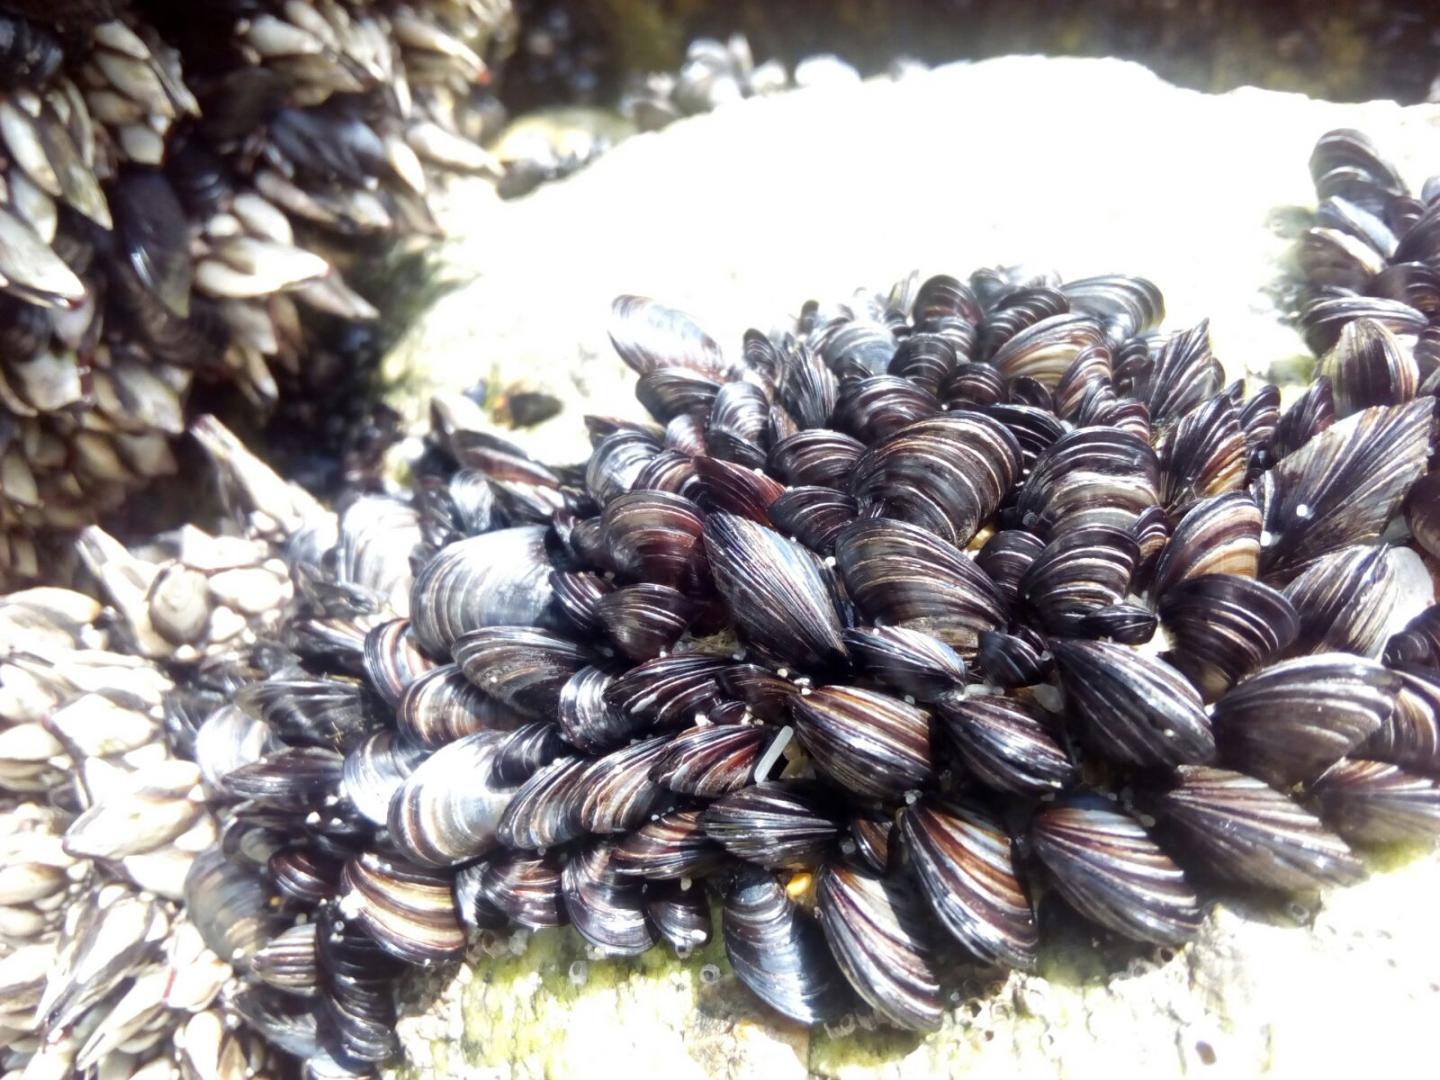 Mussels in the UAB laboratory